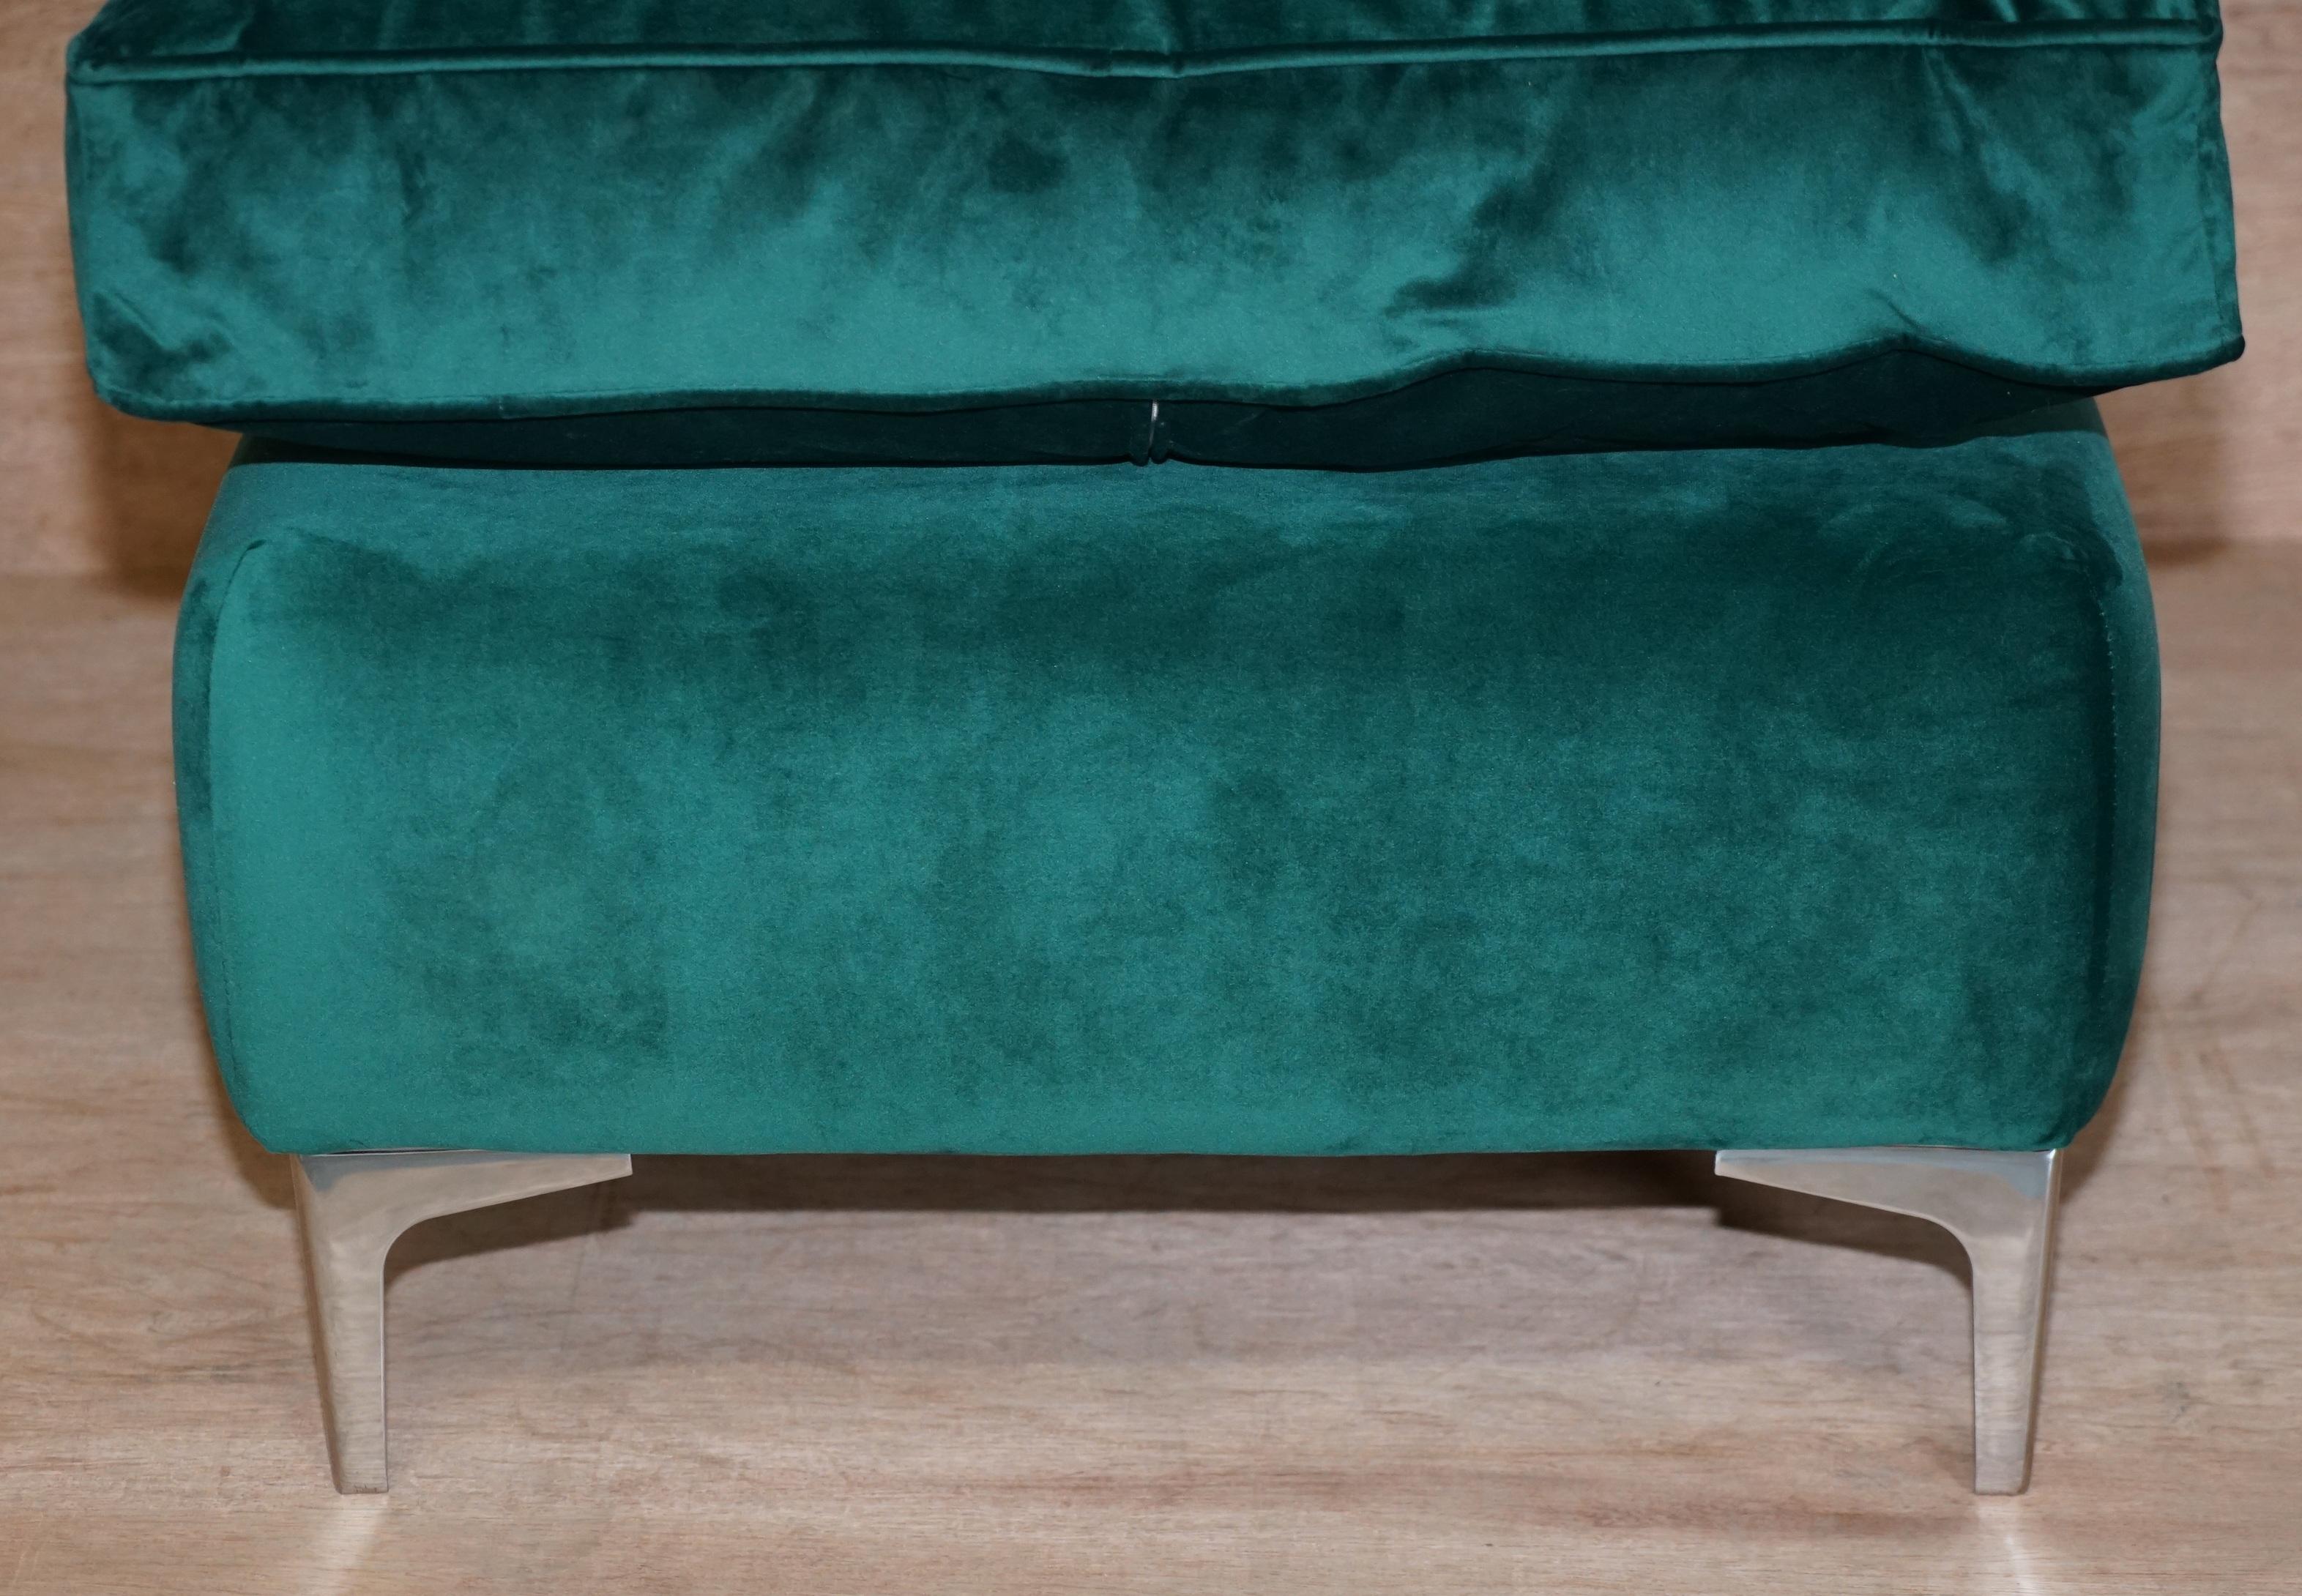 Stunning Ex Display Emerald Green Velvet Large Ottoman Footstool or Bench Seat For Sale 1